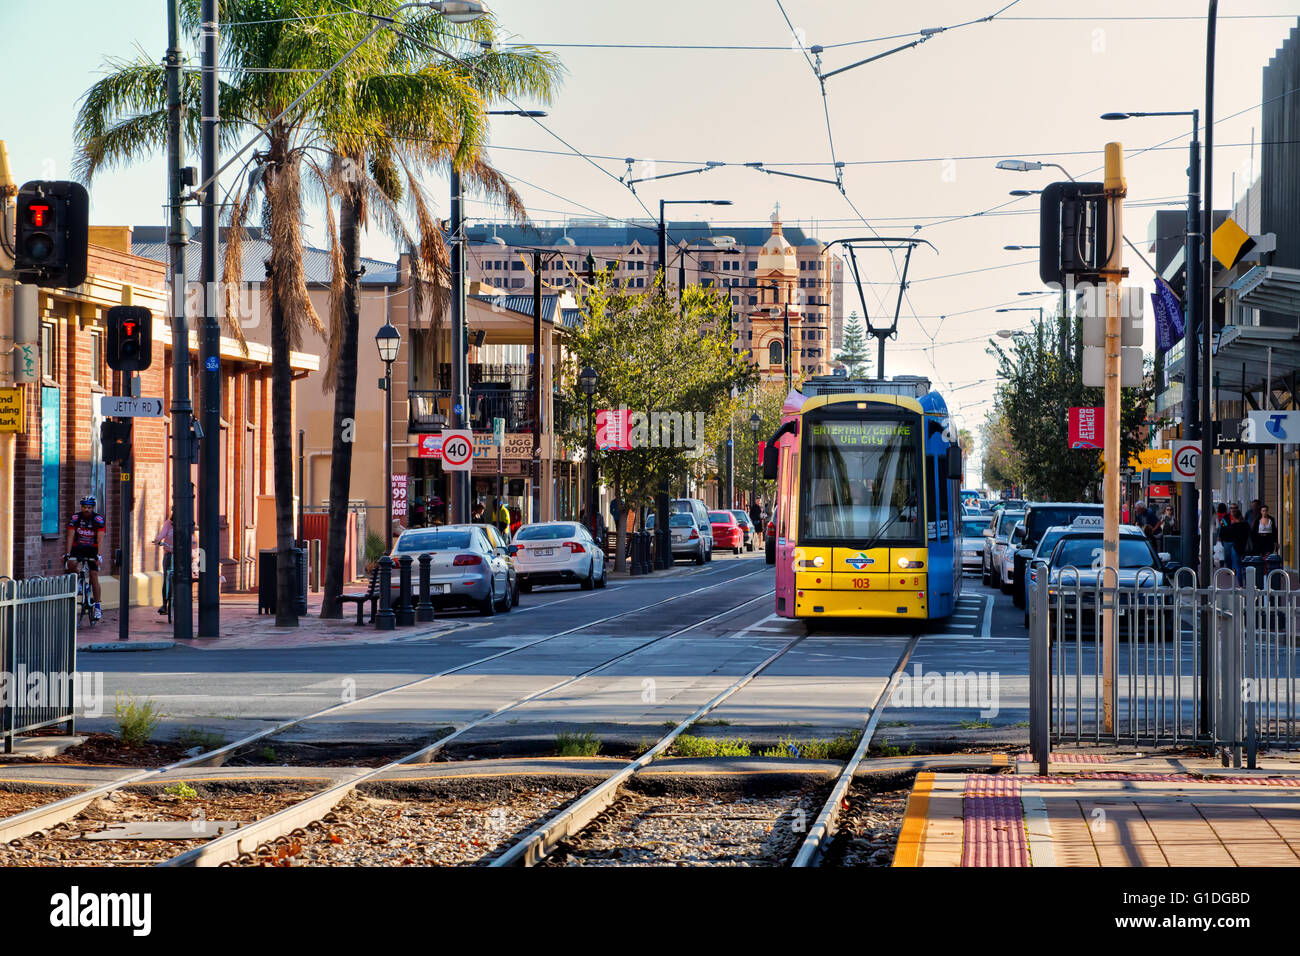 A tram in the Adelaide suburb of Glenelg Stock Photo